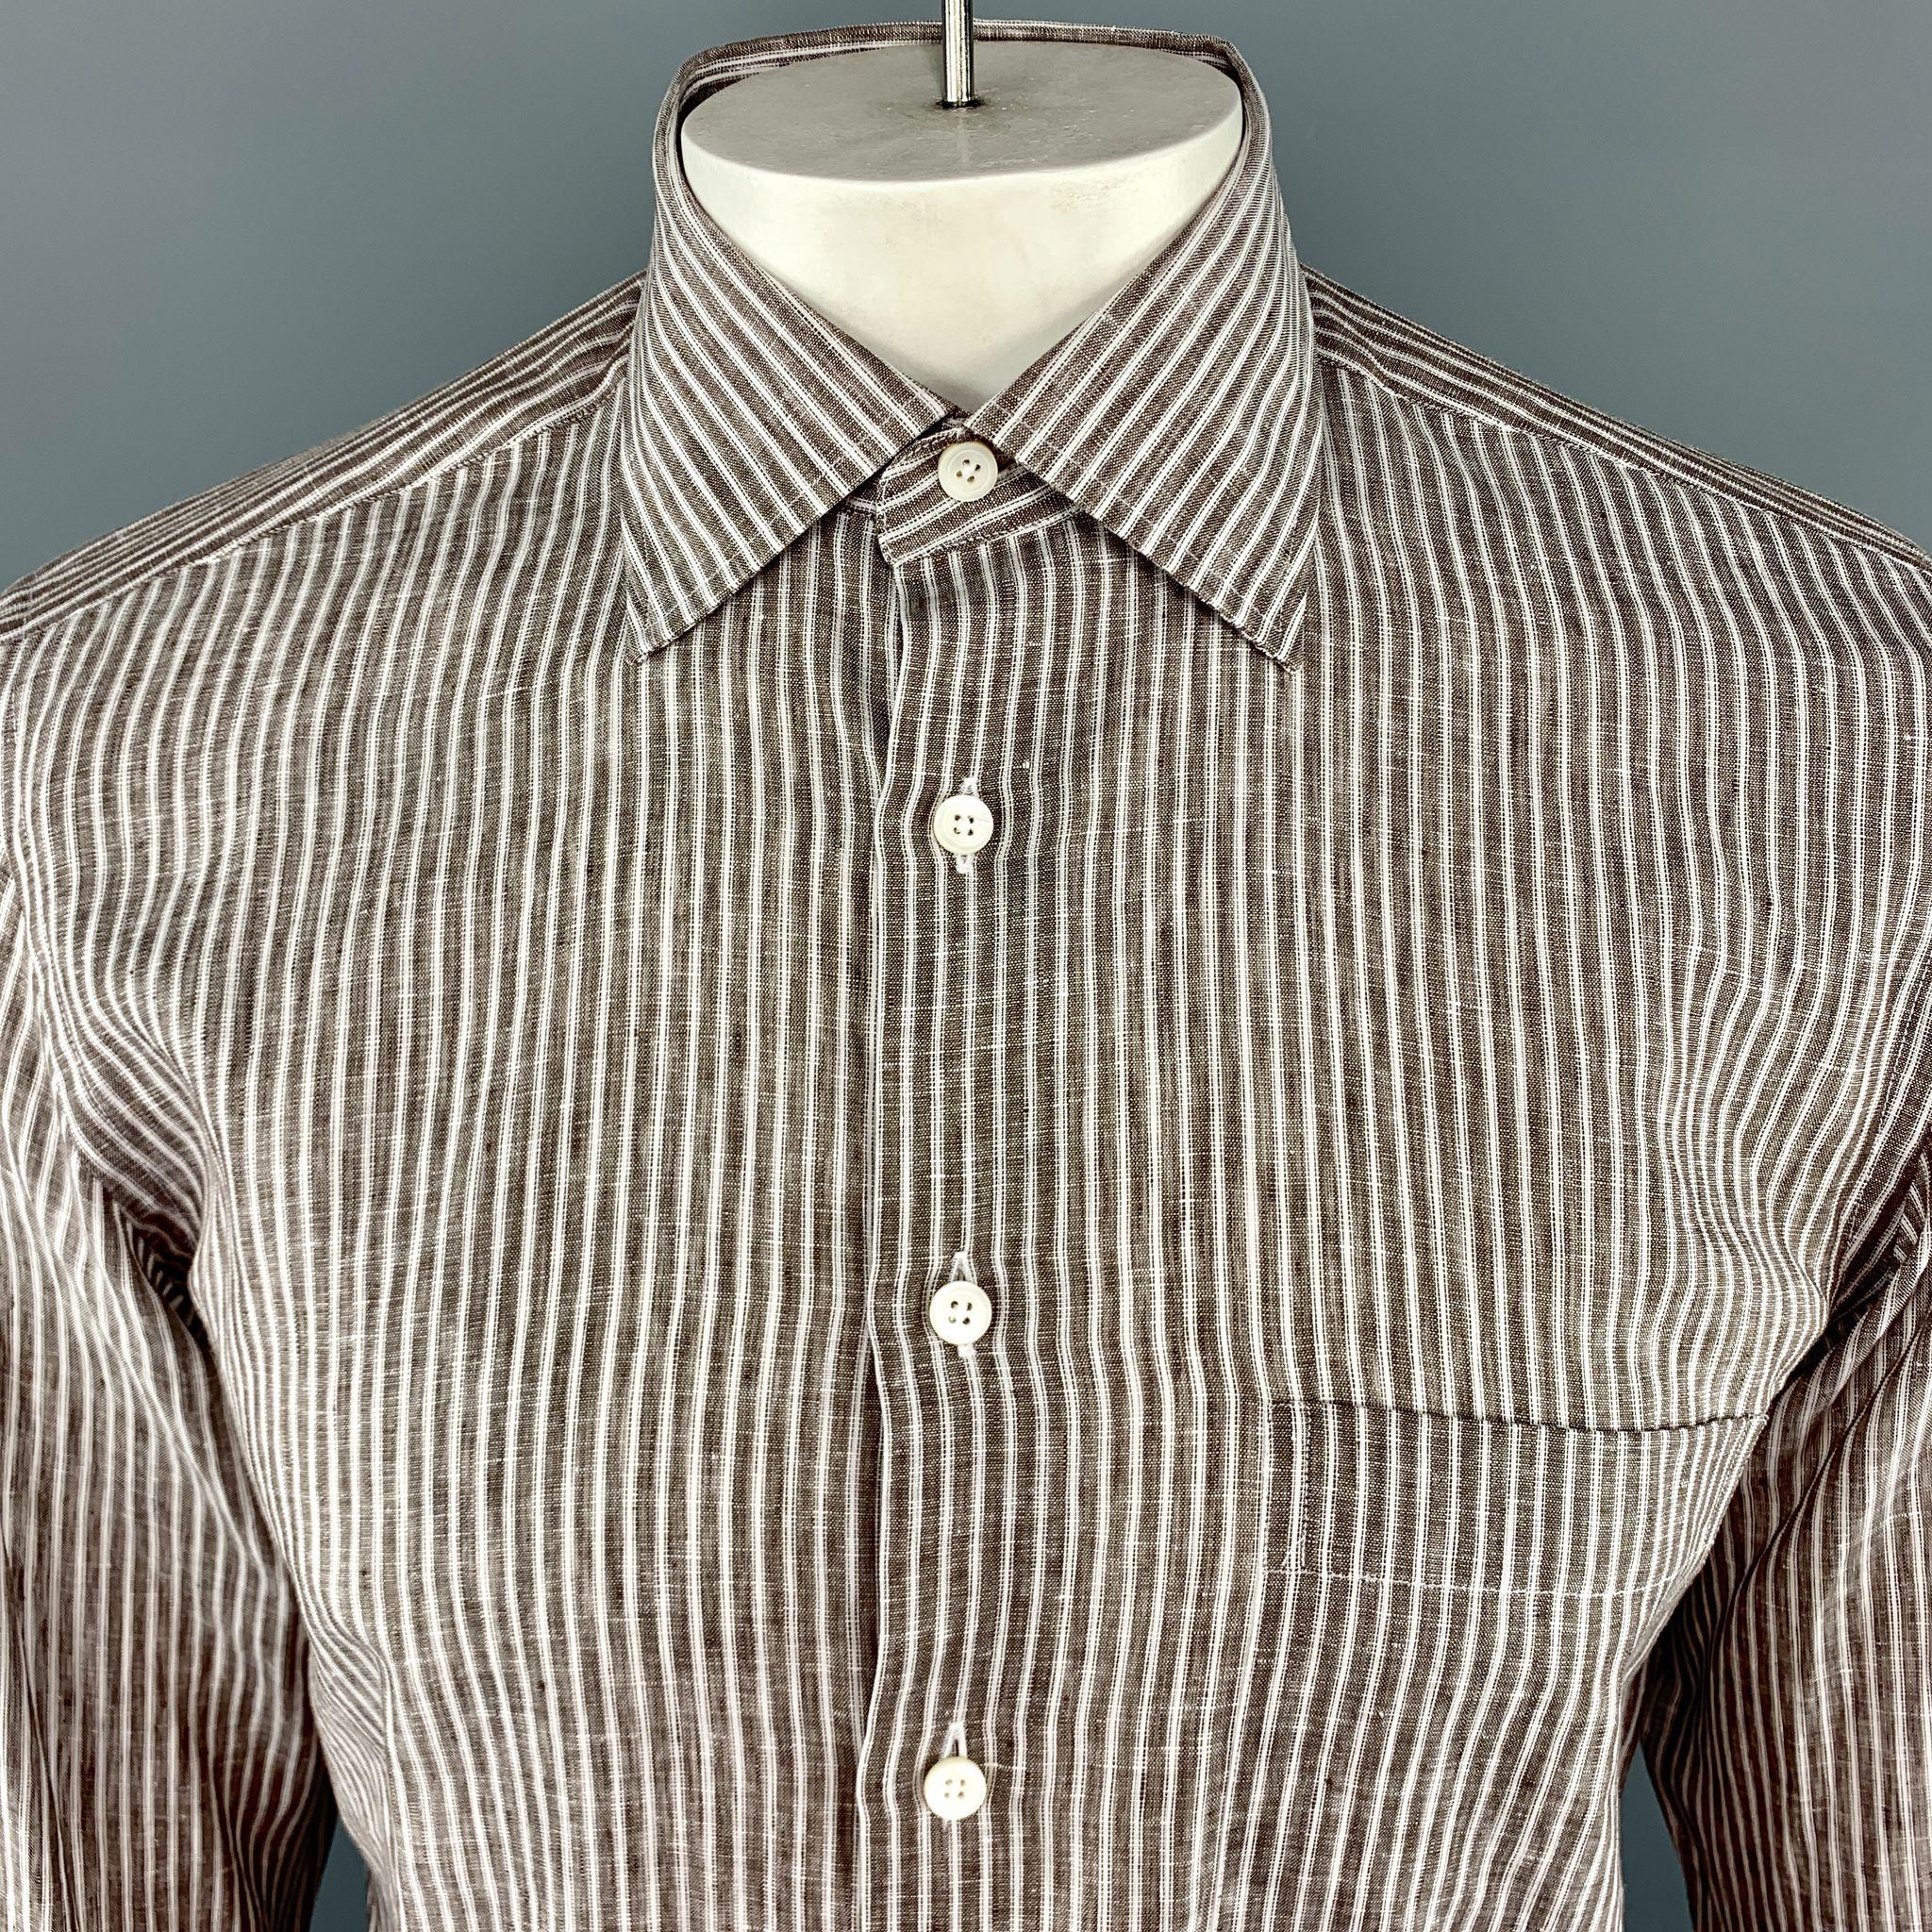 CANALI Long Sleeve Shirt comes in brown and white tones in a striped linen material, with a spread collar, a patch pocket, buttoned cuffs, button up. Made in Italy.

Excellent Pre-Owned Condition.
Marked: 39  15 1/2

Measurements:

Shoulder: 16.5